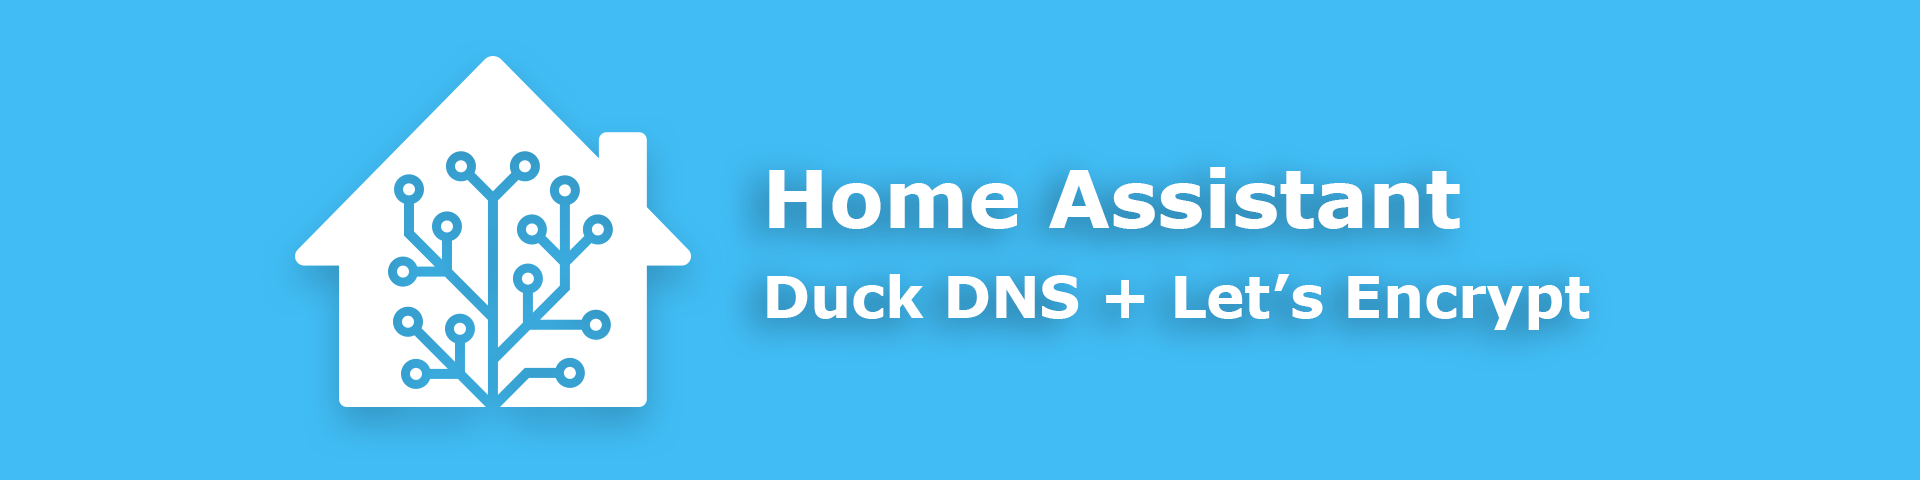 Control your home from anywhere with DuckDNS